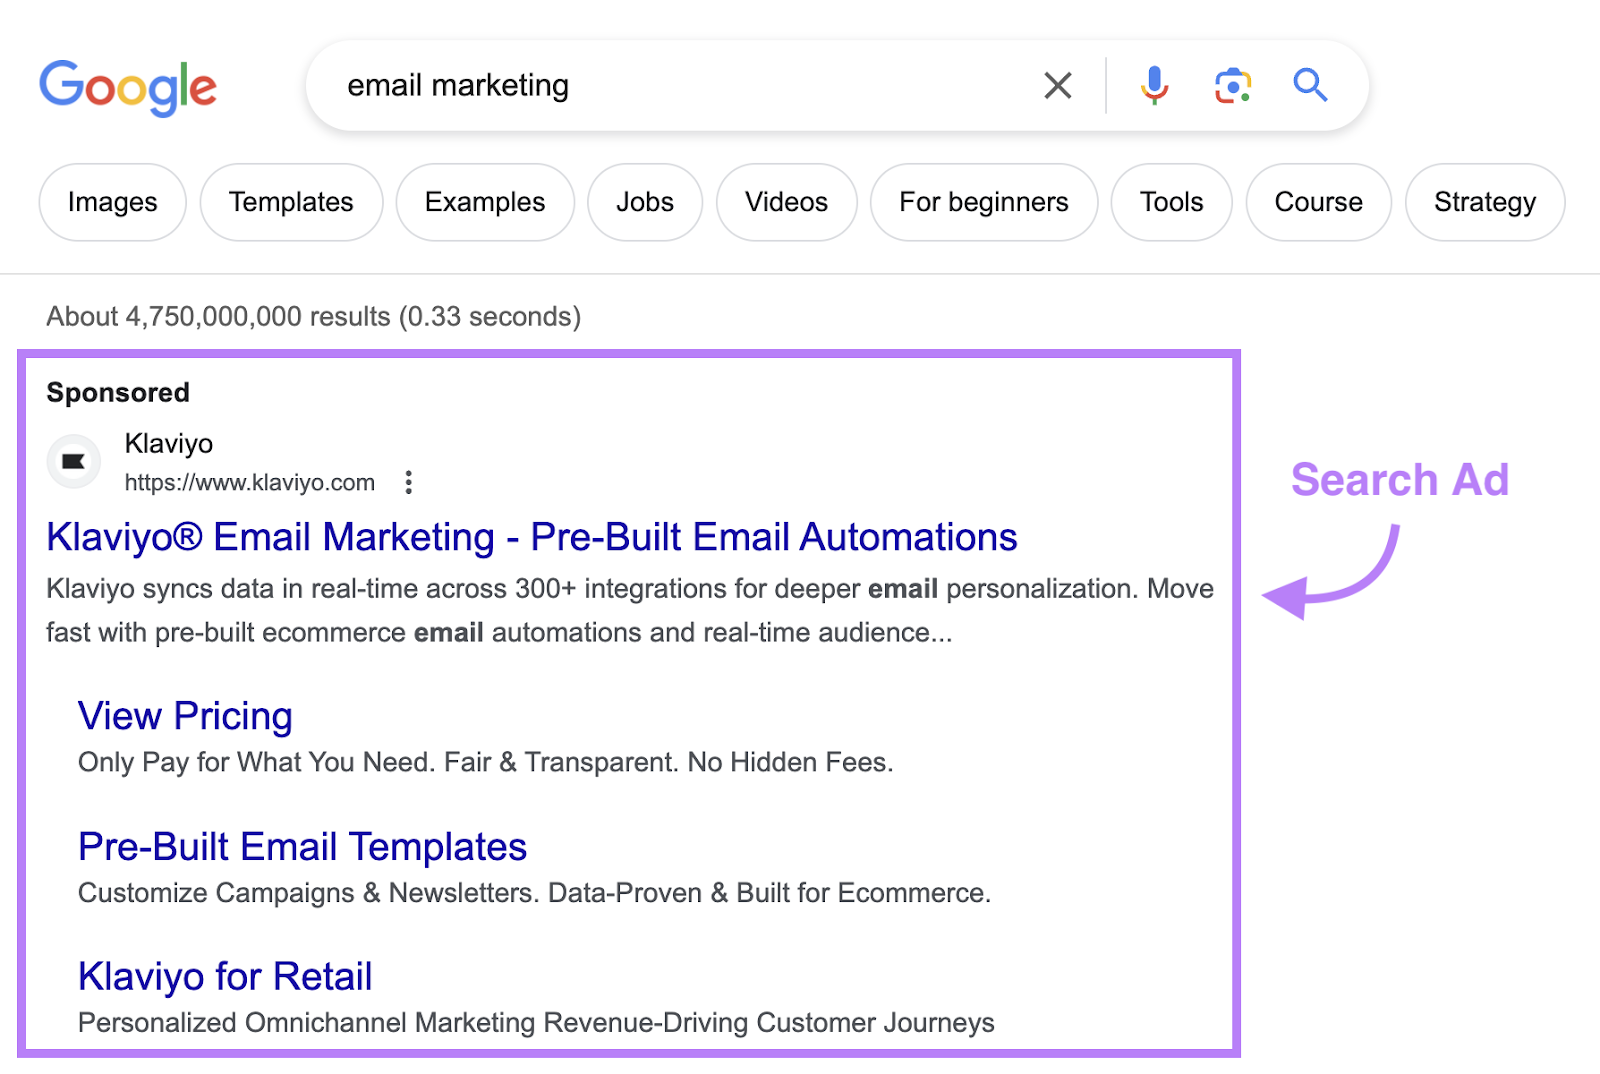 Google search ad for "email marketing"